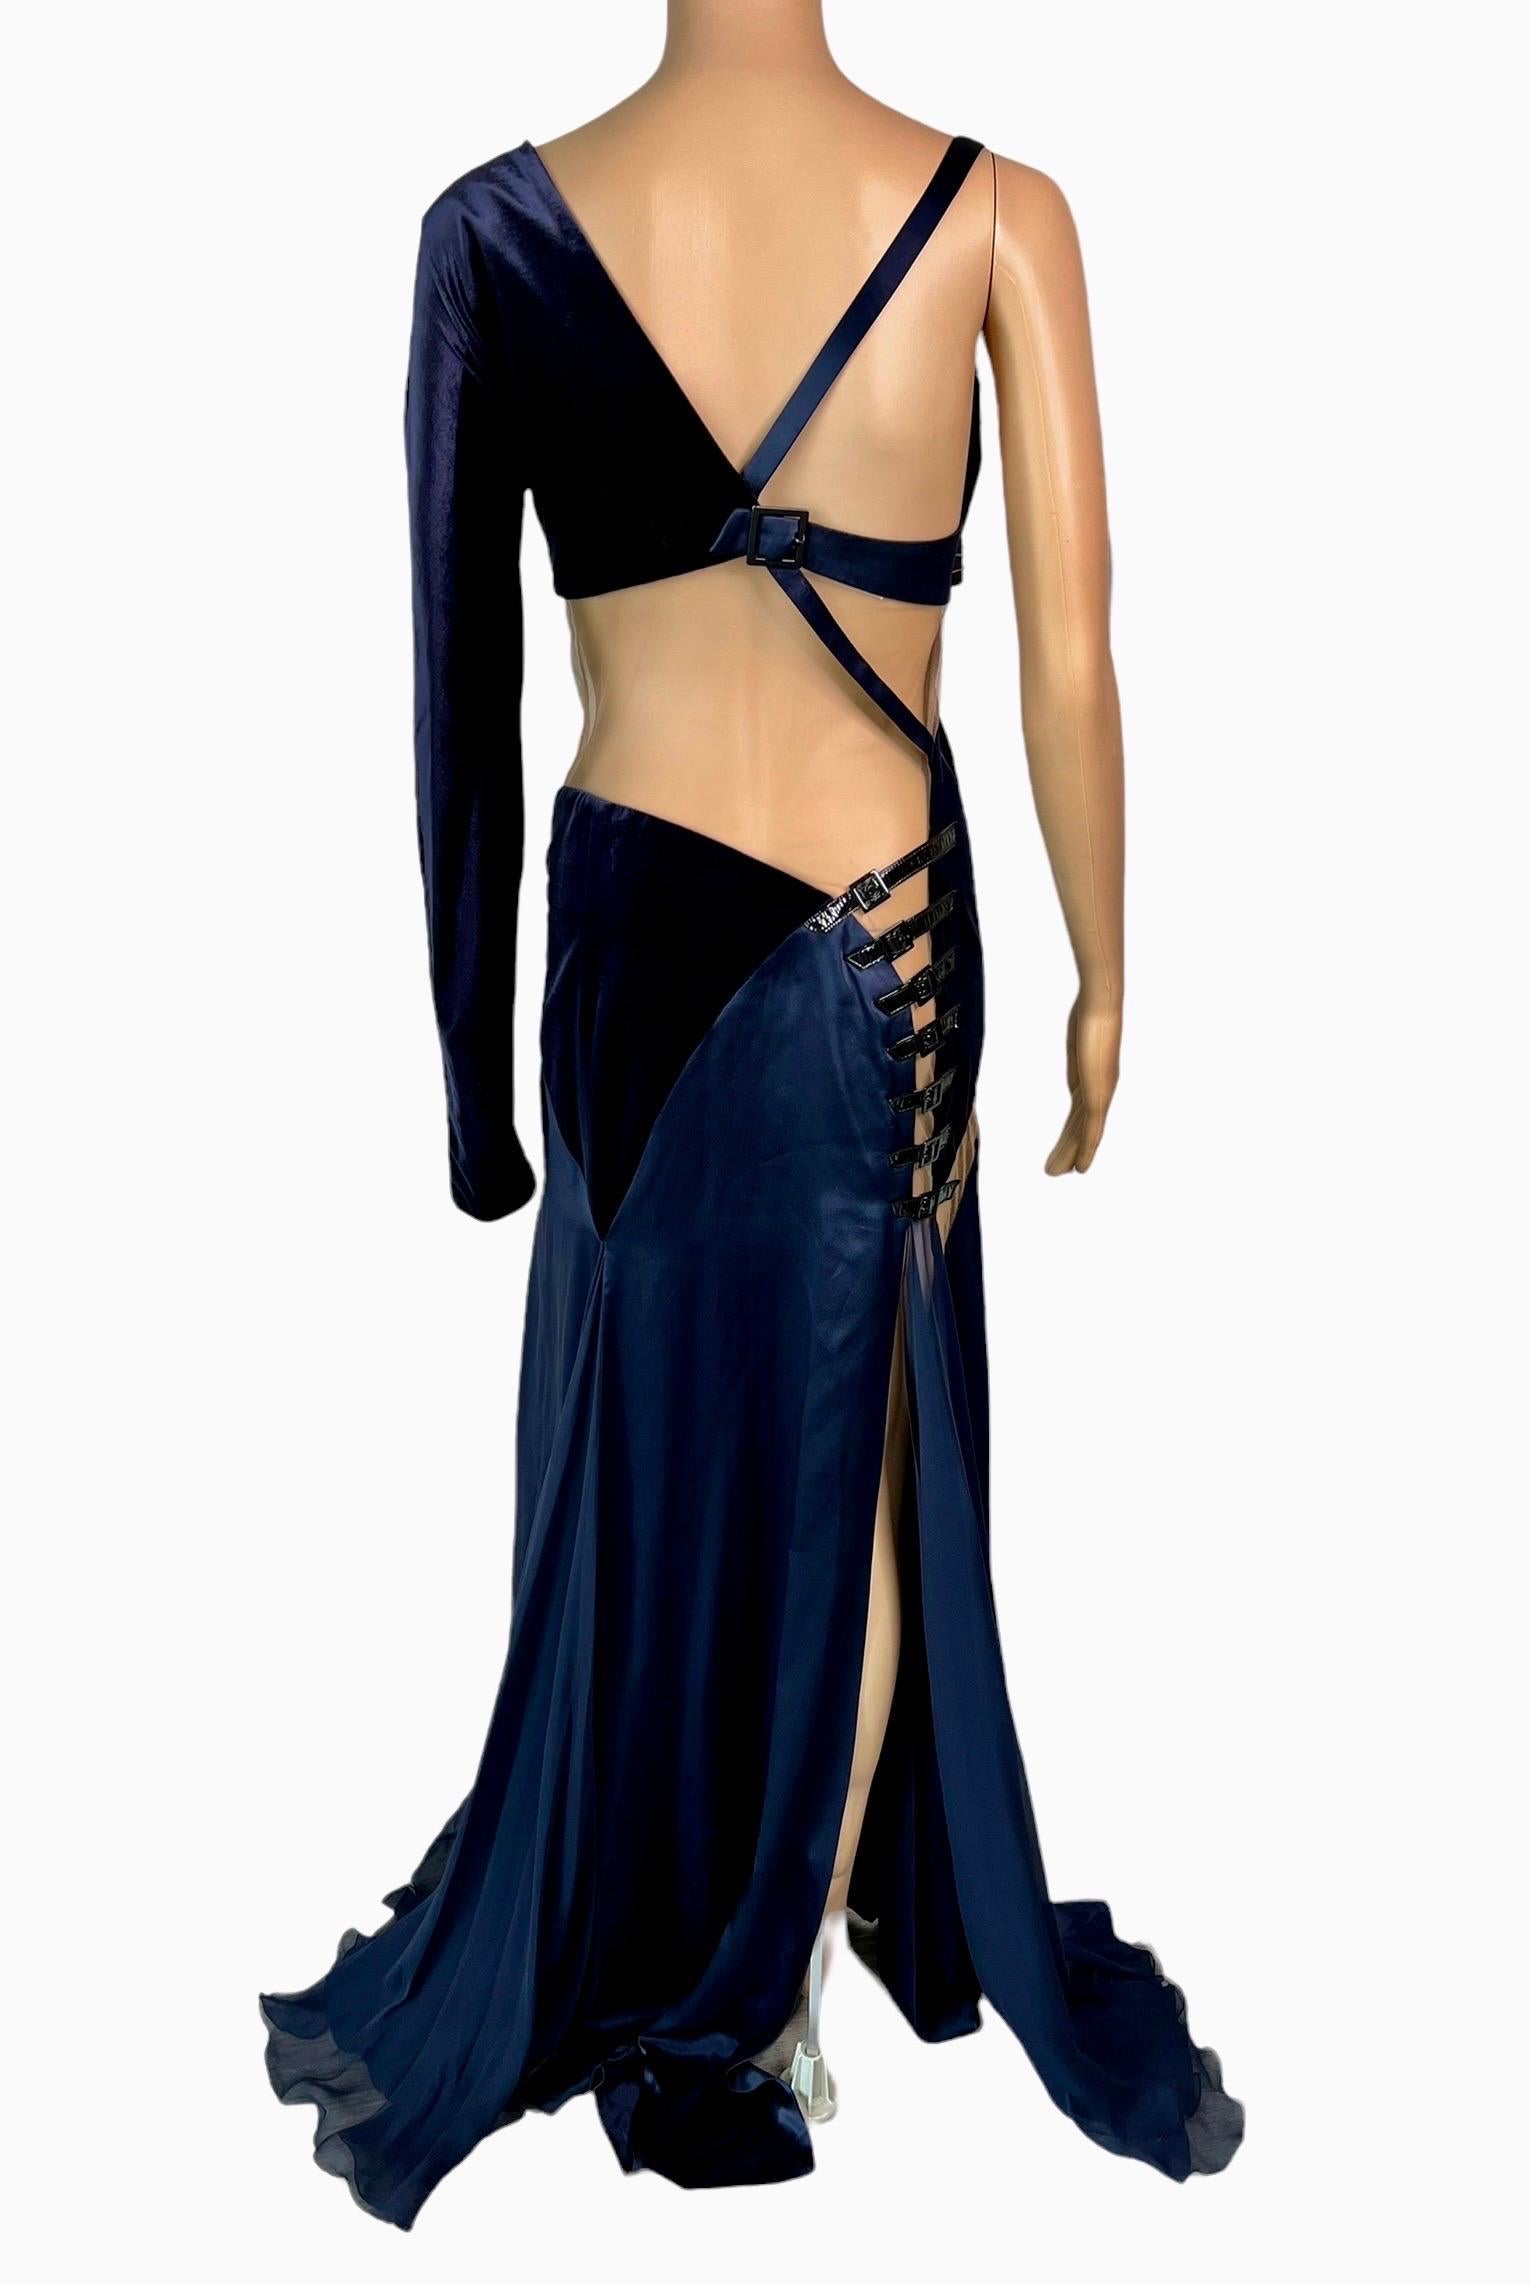 Versace F/W 2004 Runway Cutout Sheer Panels Buckle Detail Evening Dress Gown For Sale 5